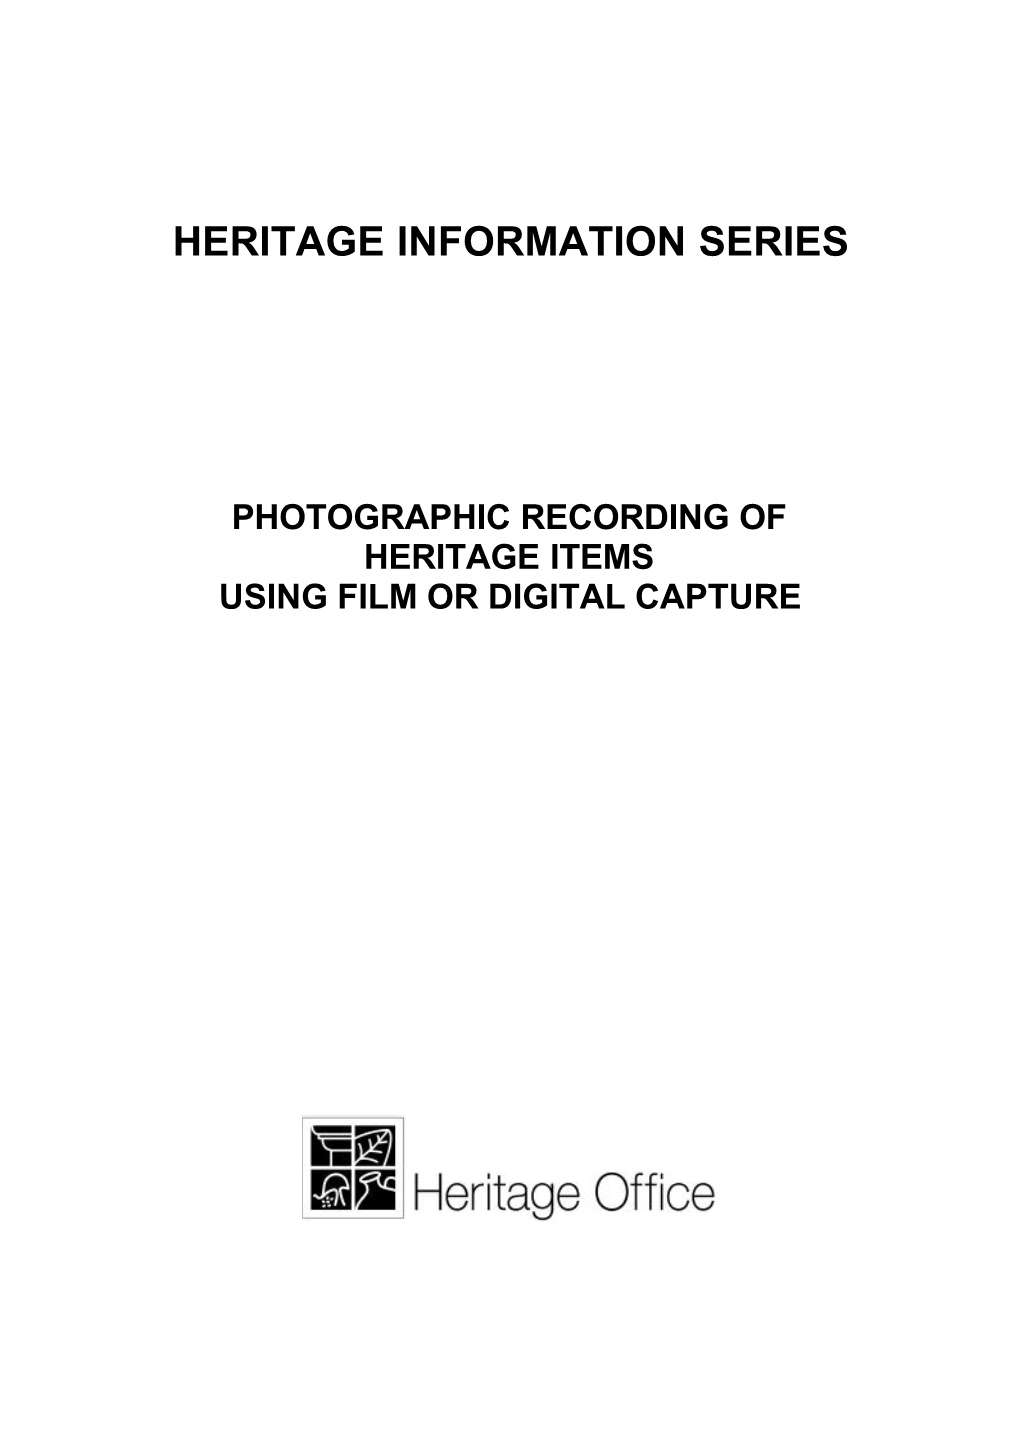 Photographic Recording of Heritage Items Using Film Or Digital Capture